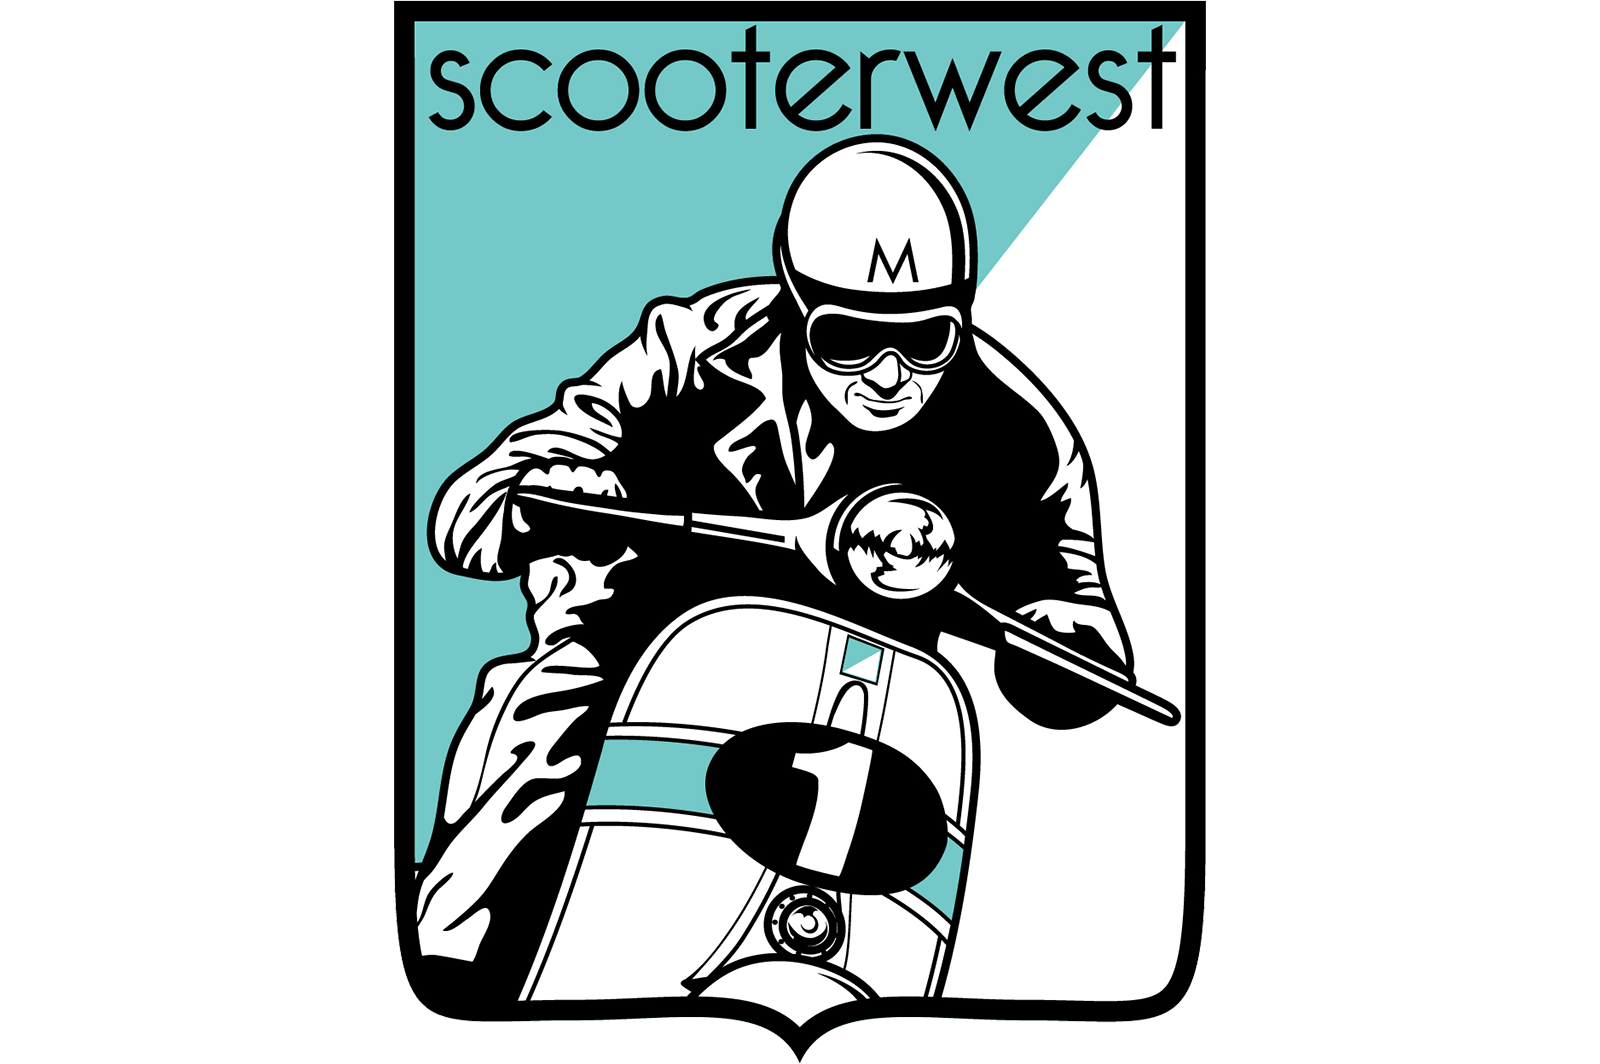 online-scooter-parts-scooterwest | San Diego Scooters | Vespa | Genuine ...